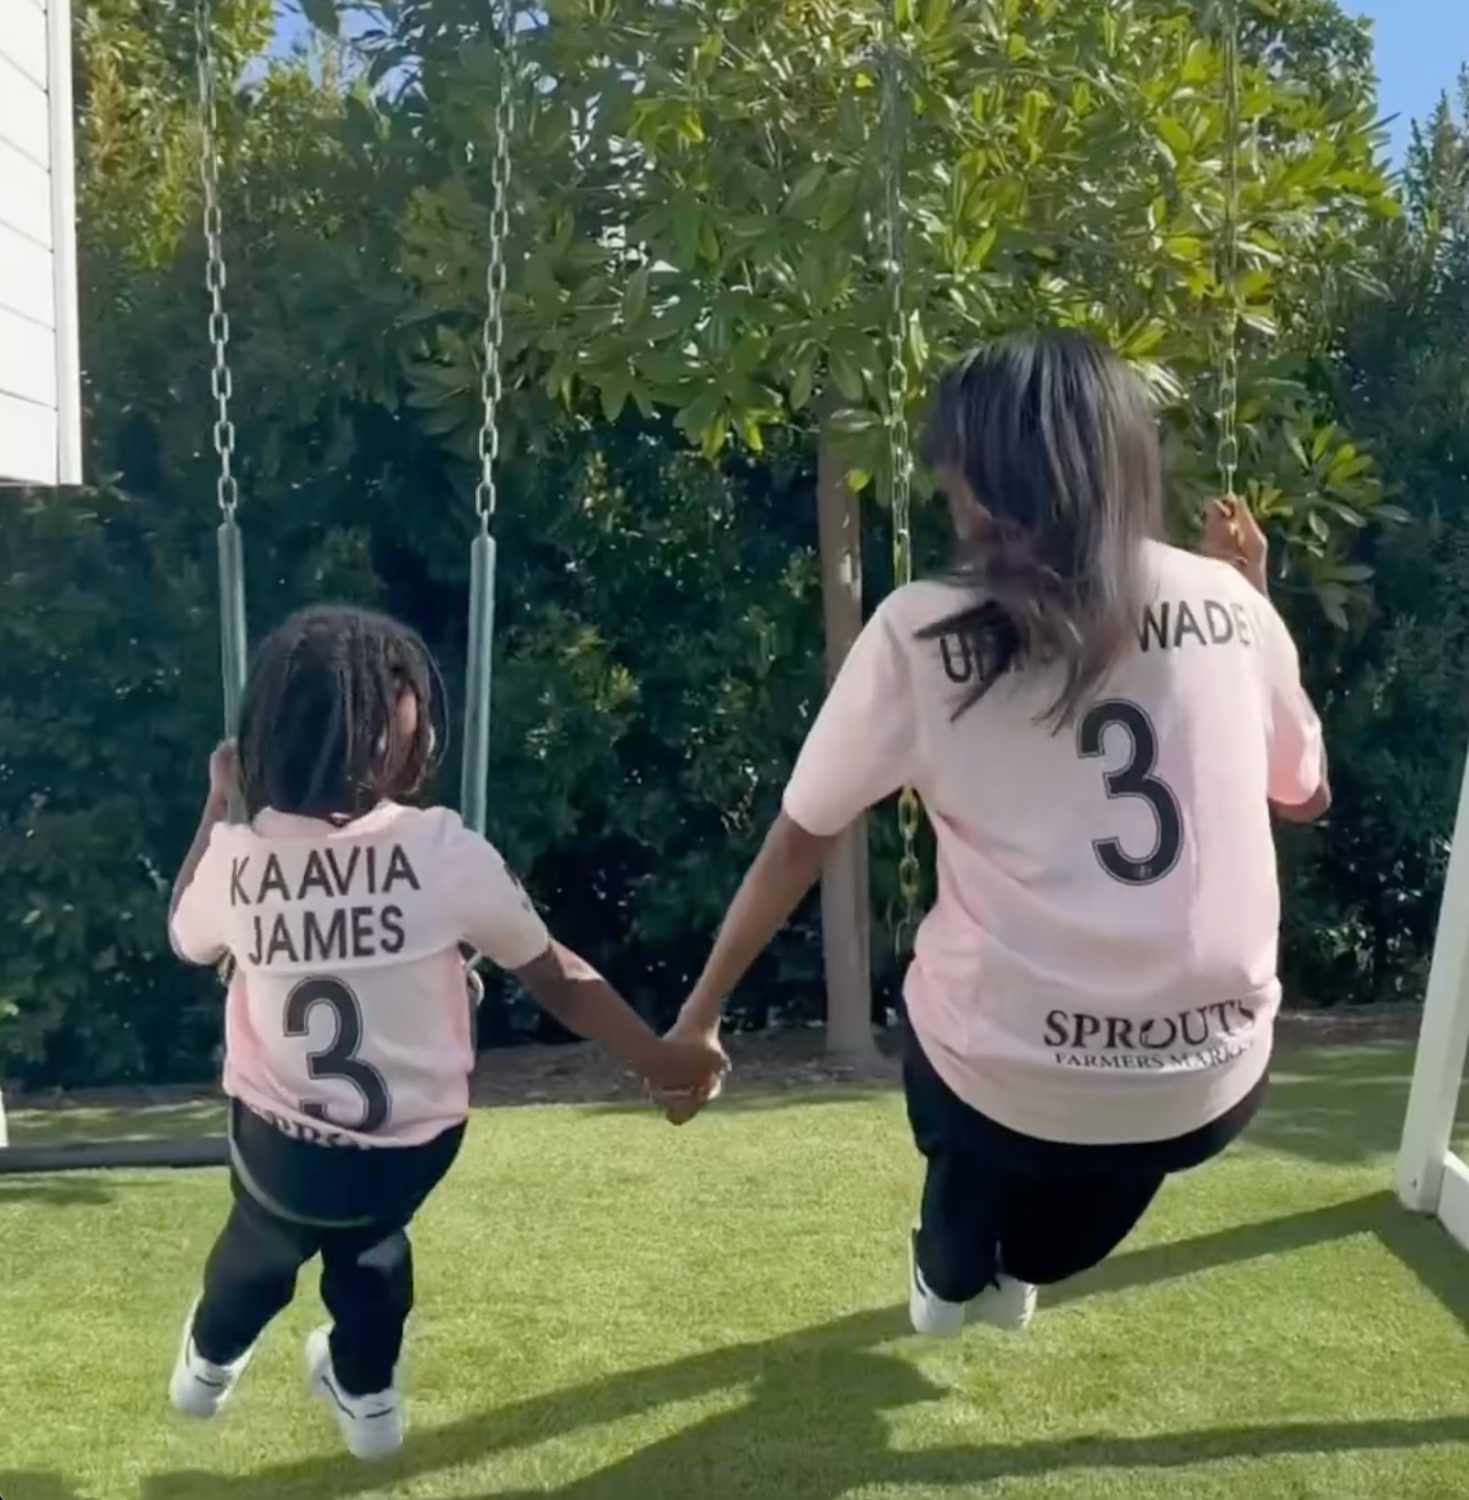 Gabrielle Union Shares Adorable Mother's Day Lip Sync Video with Daughter Kaavia: 'Seeing Double?'